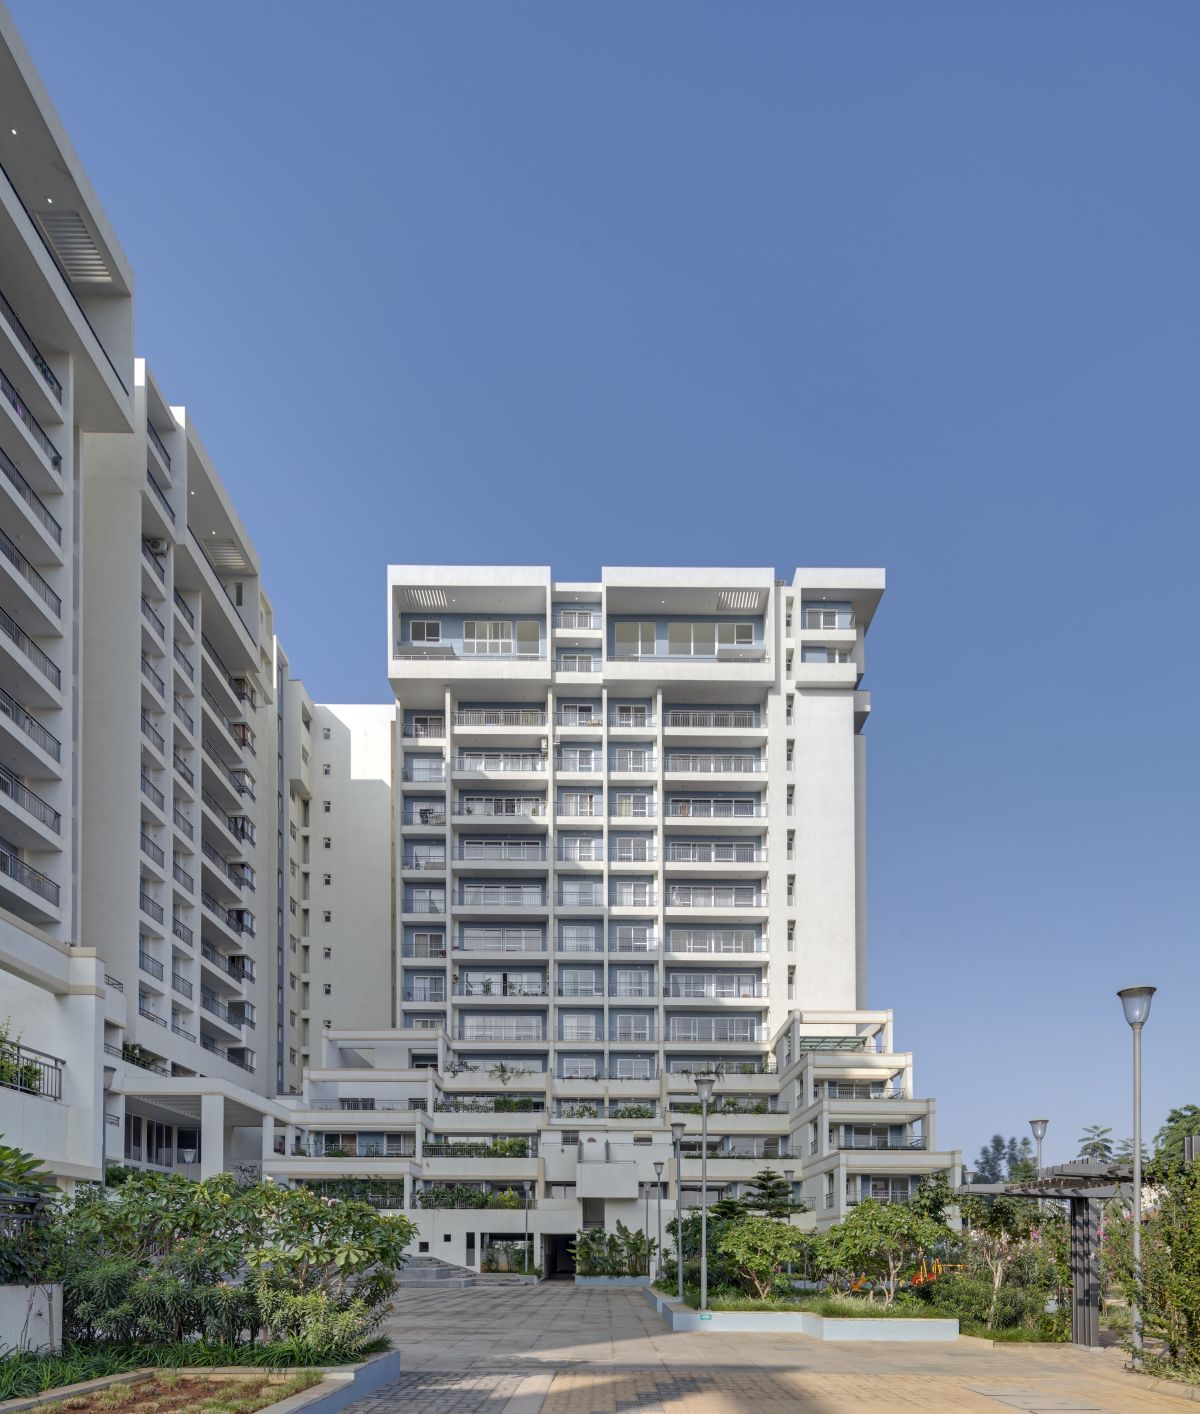 Terraced Residential Highrise, at Nallurhalli Road, Siddhapura, Bangalore, by CnT Architects 16